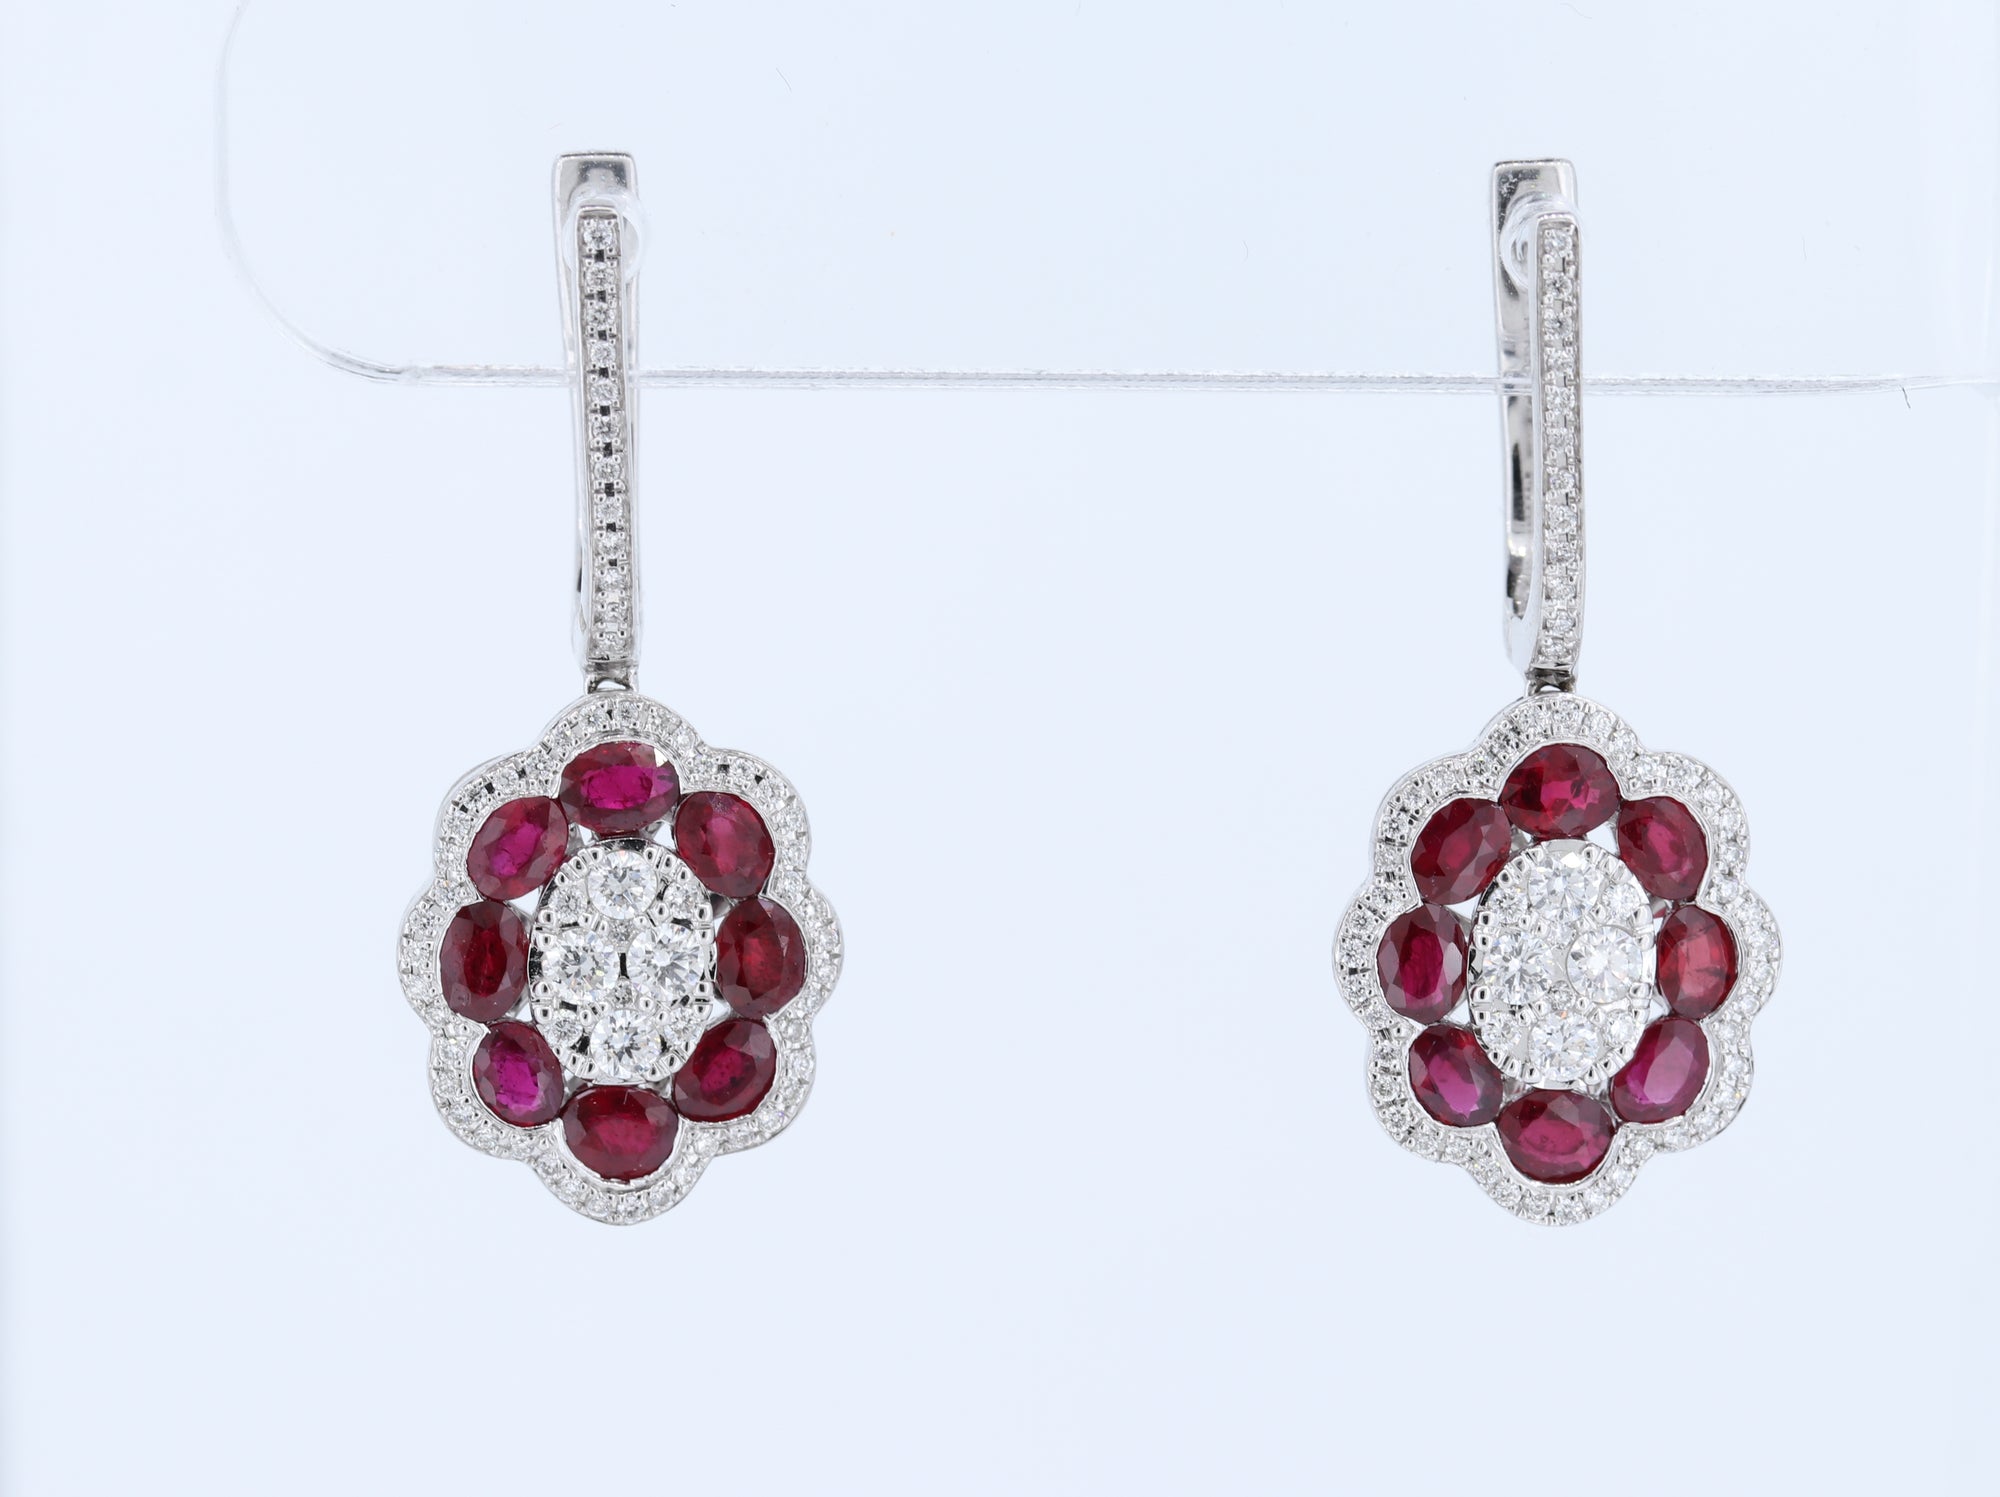 14kt Ruby and Diamond Earrings in White Gold - Ruby Count - 16 pcs (4.19ctw)